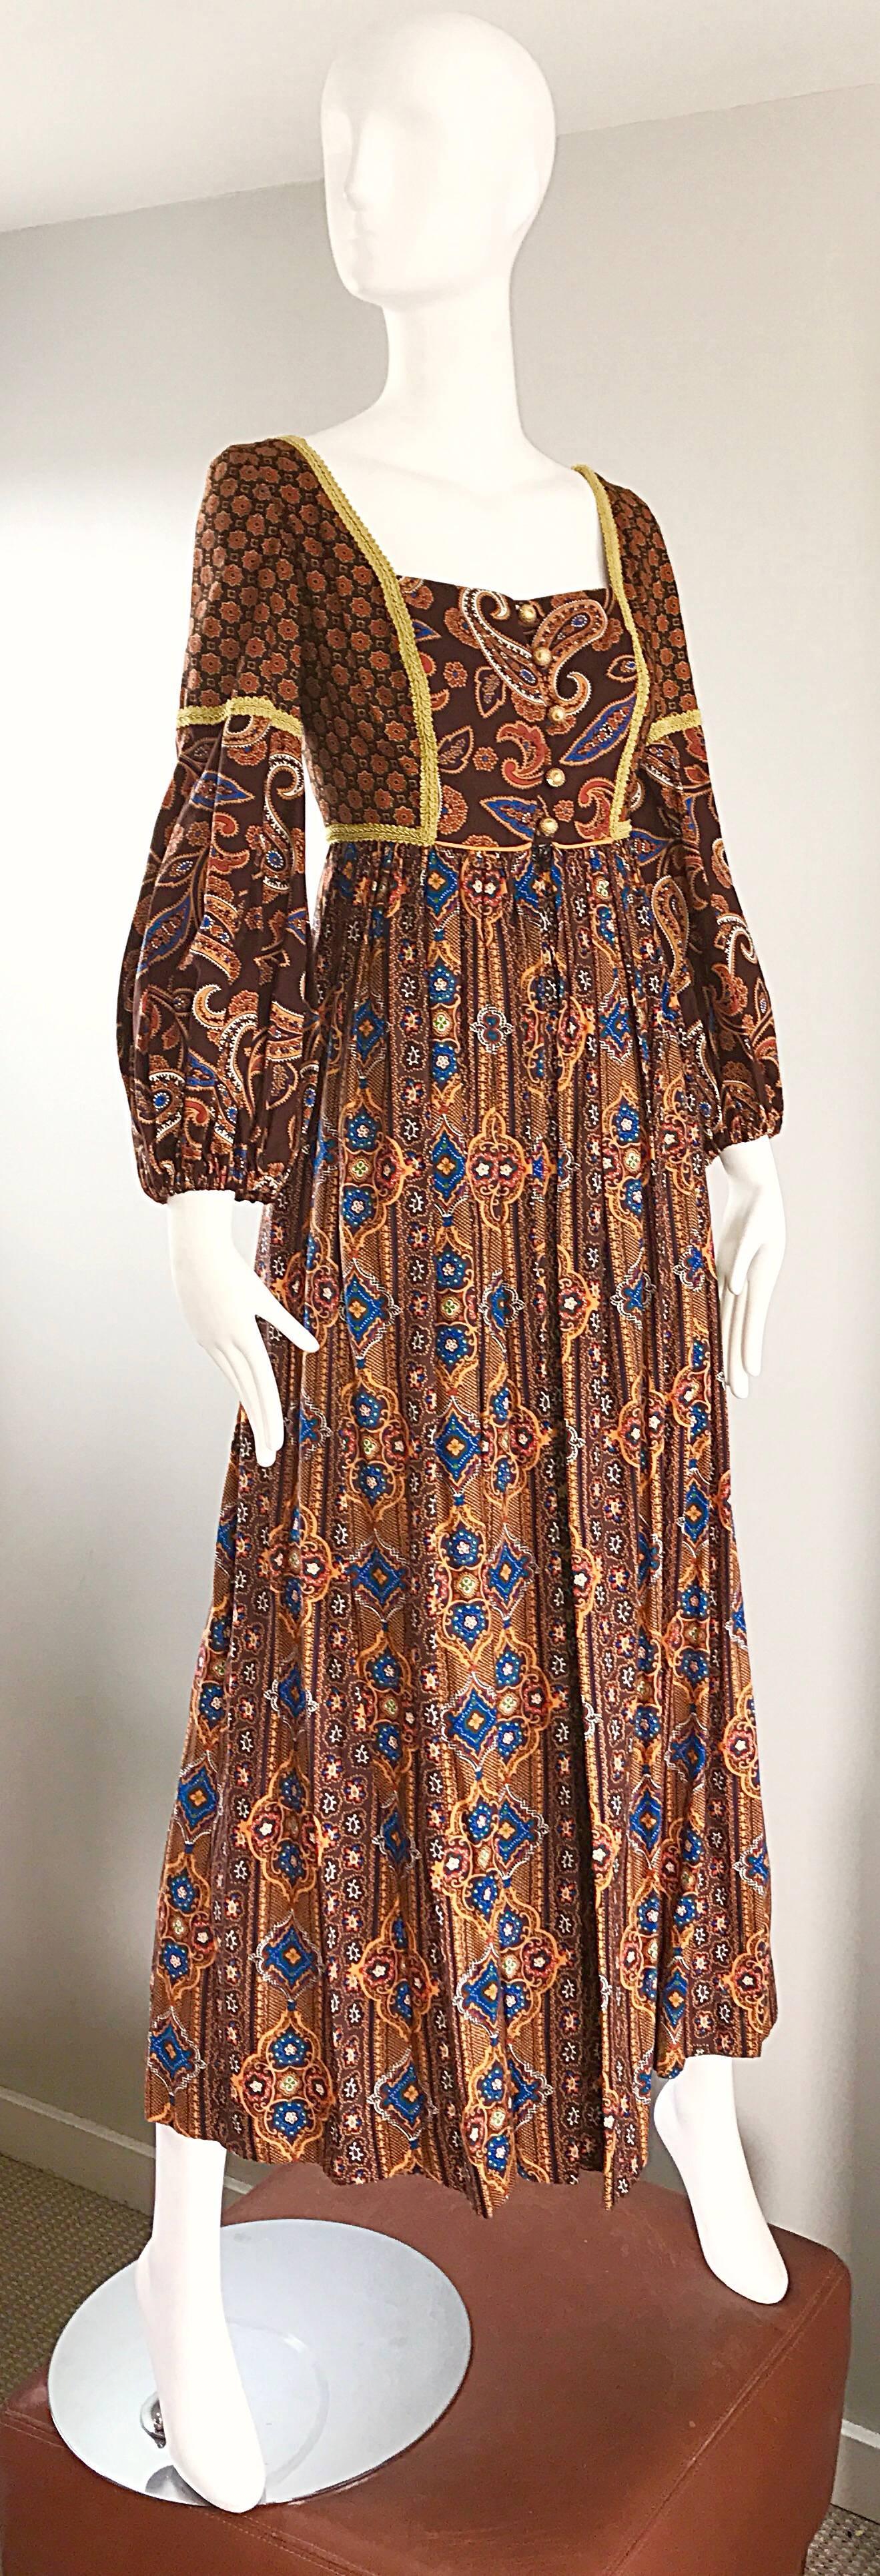 Jay Morley for Fern Violette 70s Boho Paisley Vintage Cotton Peasant Maxi Dress In Excellent Condition For Sale In San Diego, CA